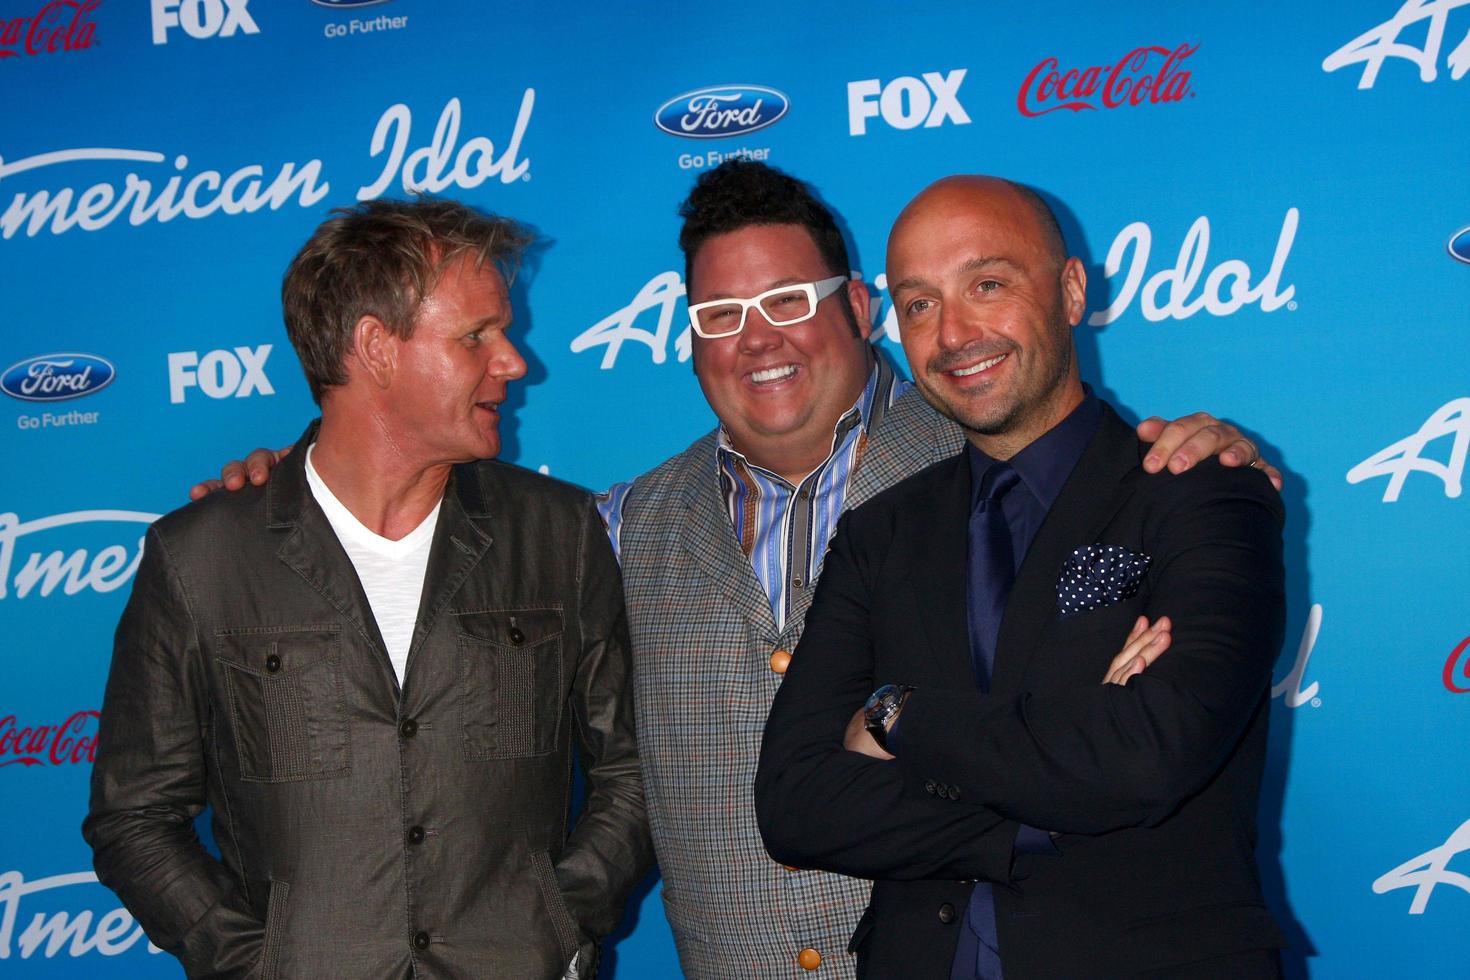 LOS ANGELES, MAR 7 -  Chefs Gordon Ramsay, Graham Elliott, and Vineyard owner and restaurateur Joe Bastianich arrives at the 2013 American Idol Finalists Party at the The Grove on March 7, 2013 in Los Angeles, CA photo